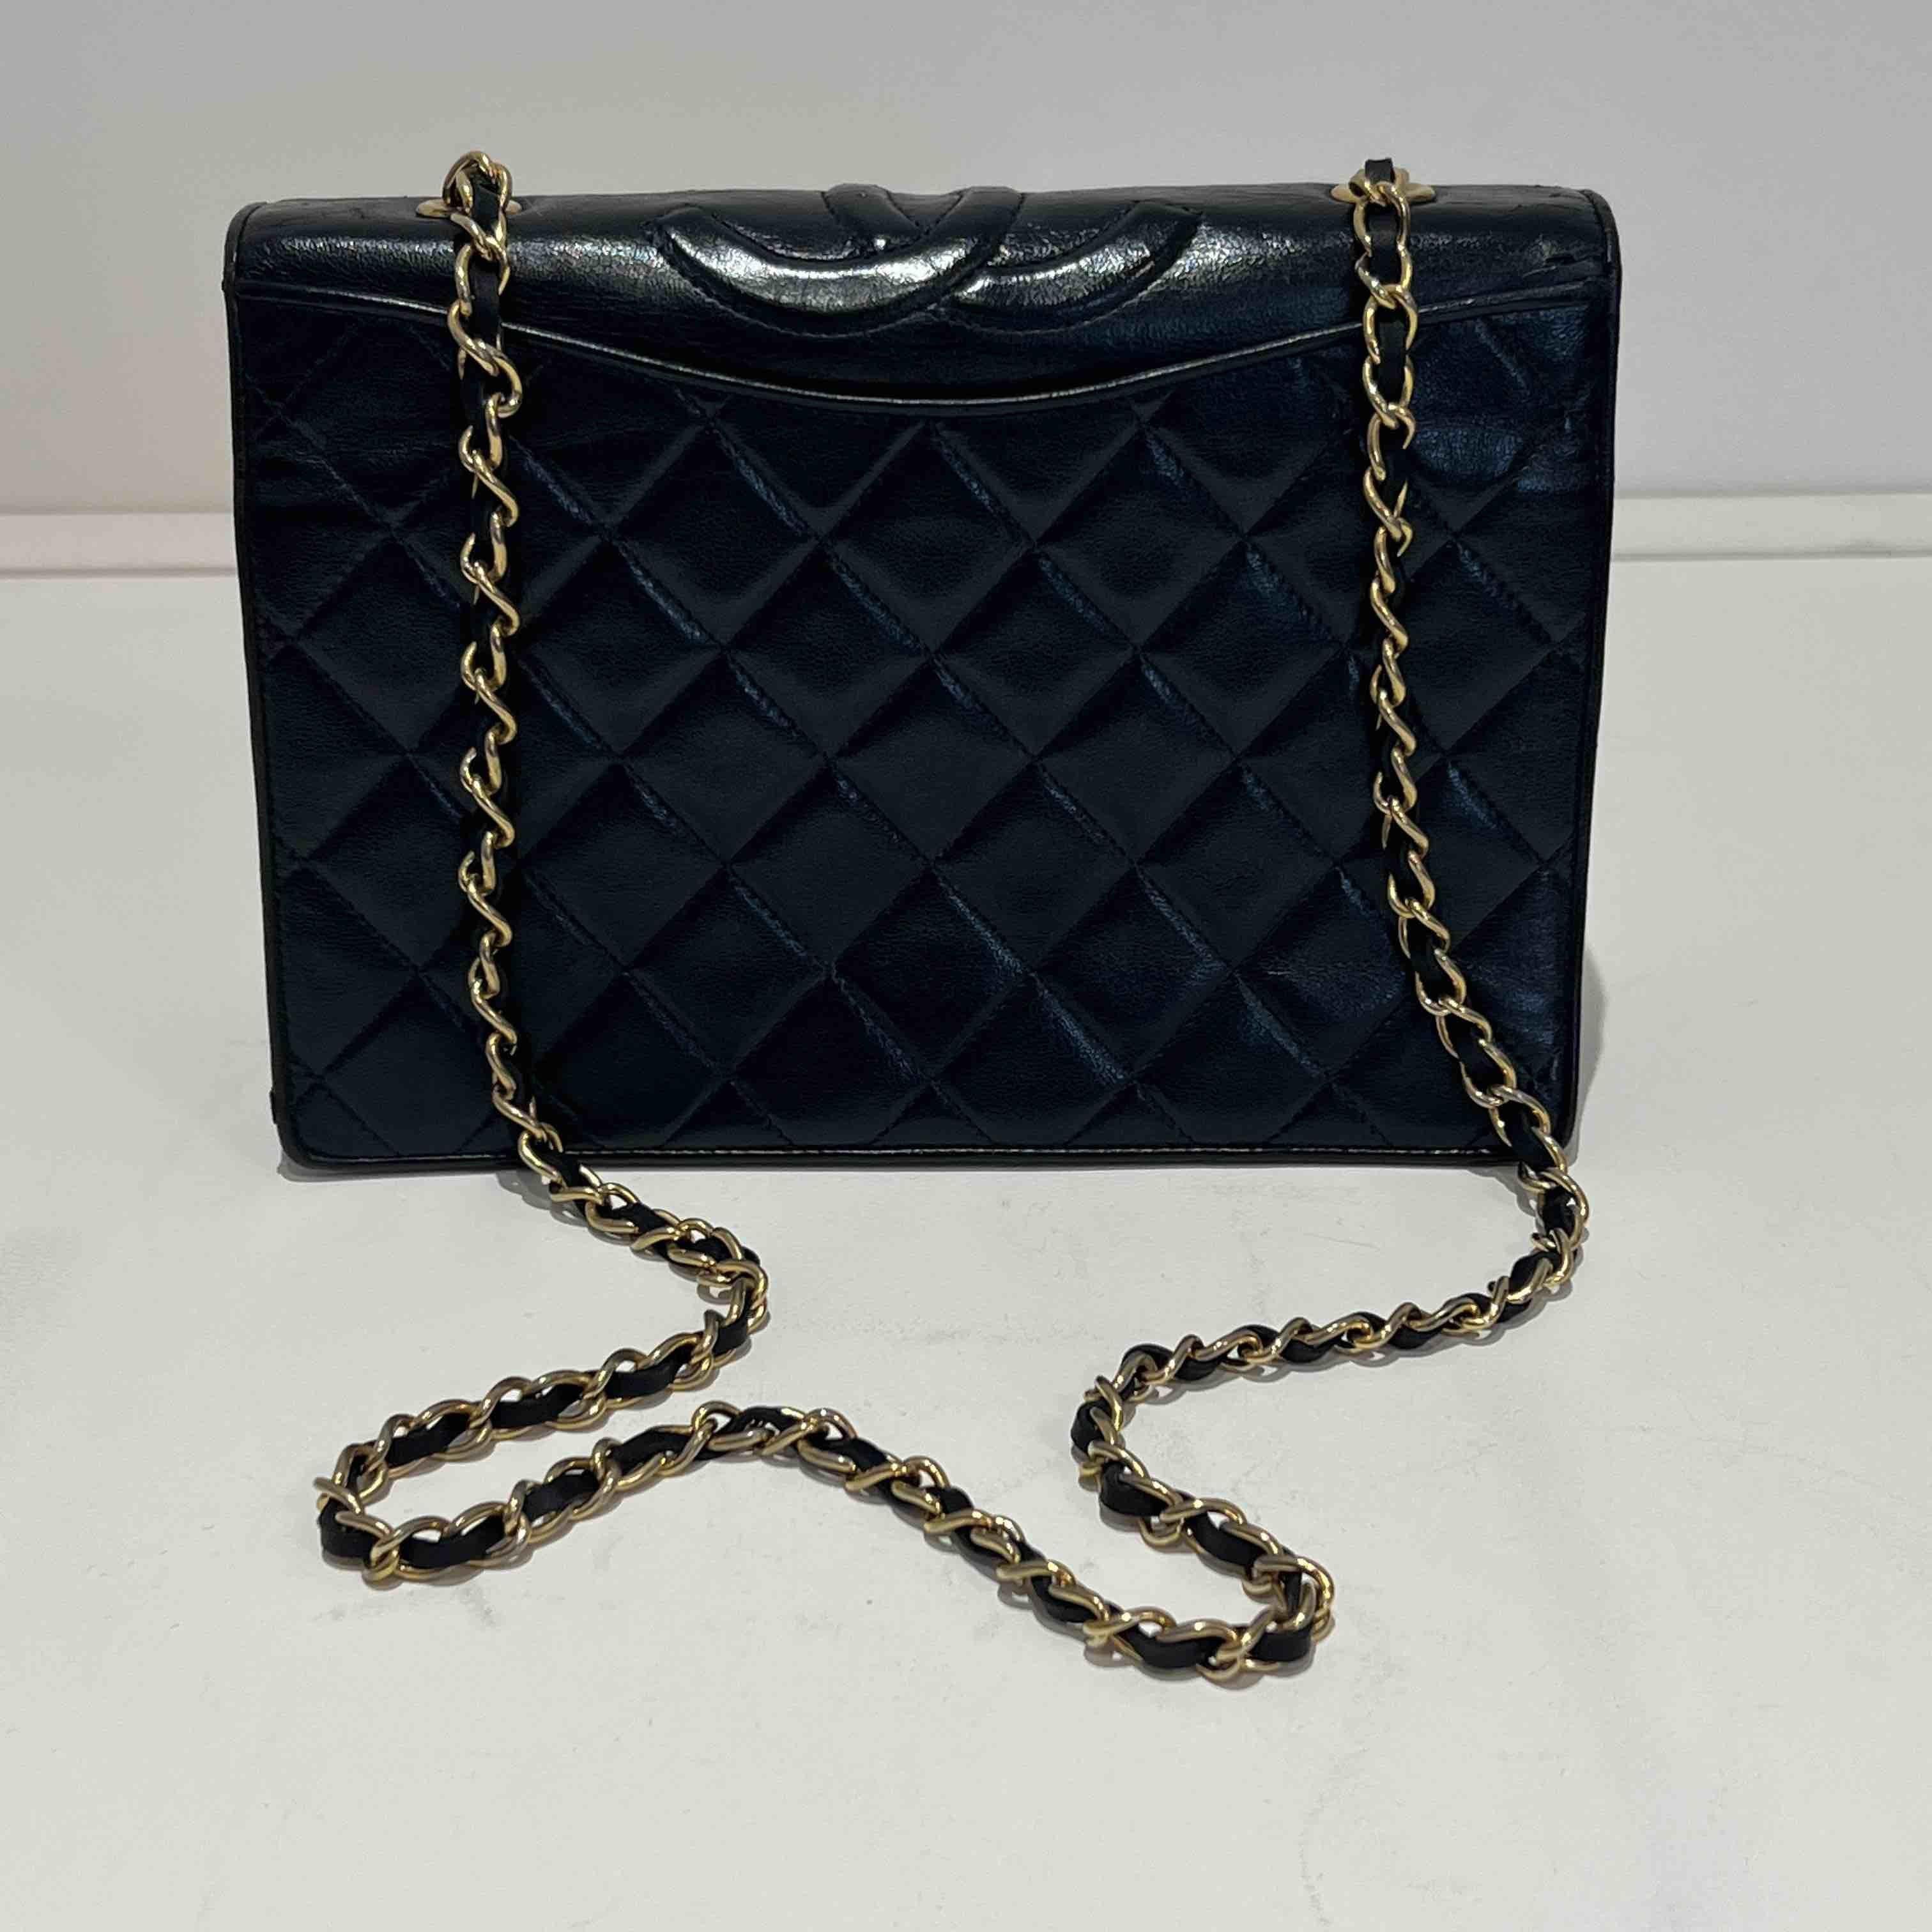 CHANEL vintage Timeless bag in black leather. The hardware is in gilt metal.
In good condition.
Made in France.
Dimensions: 23x16.5x6.5cm.
Shoulder strap: 94cm.
Hologram: 12...
Authenticity card: no - Collection: 1989-91.

Will be delivered in a